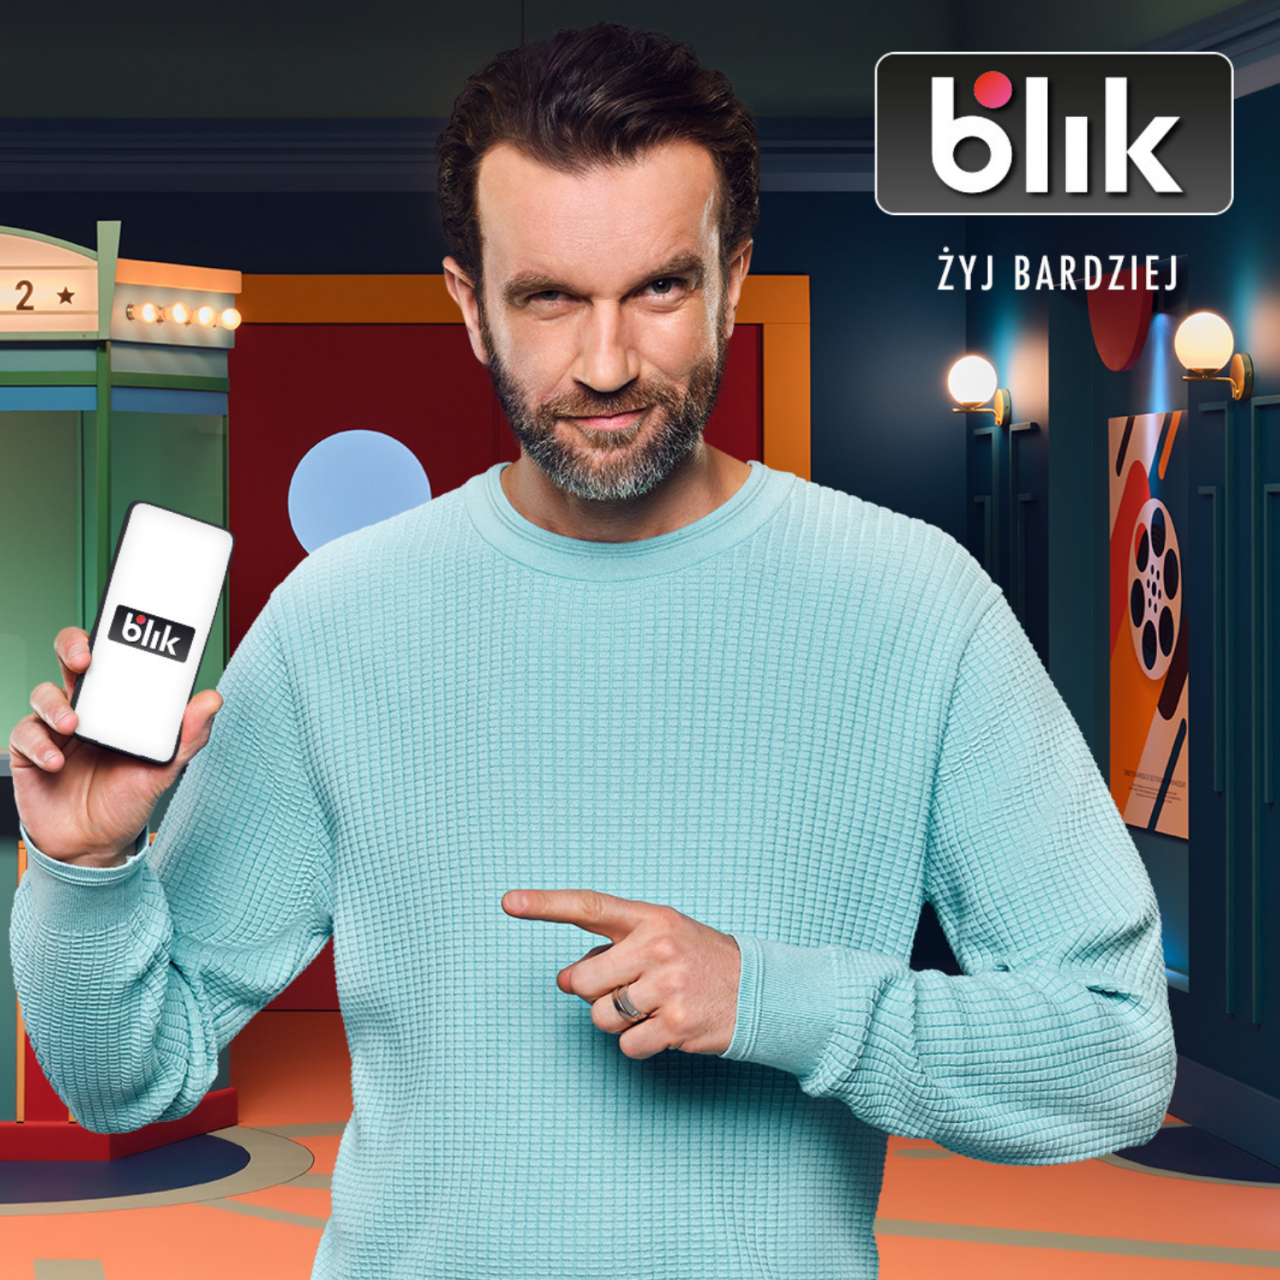 Tomasz Kot in the Blik commercial encourages "Be a payment star". 